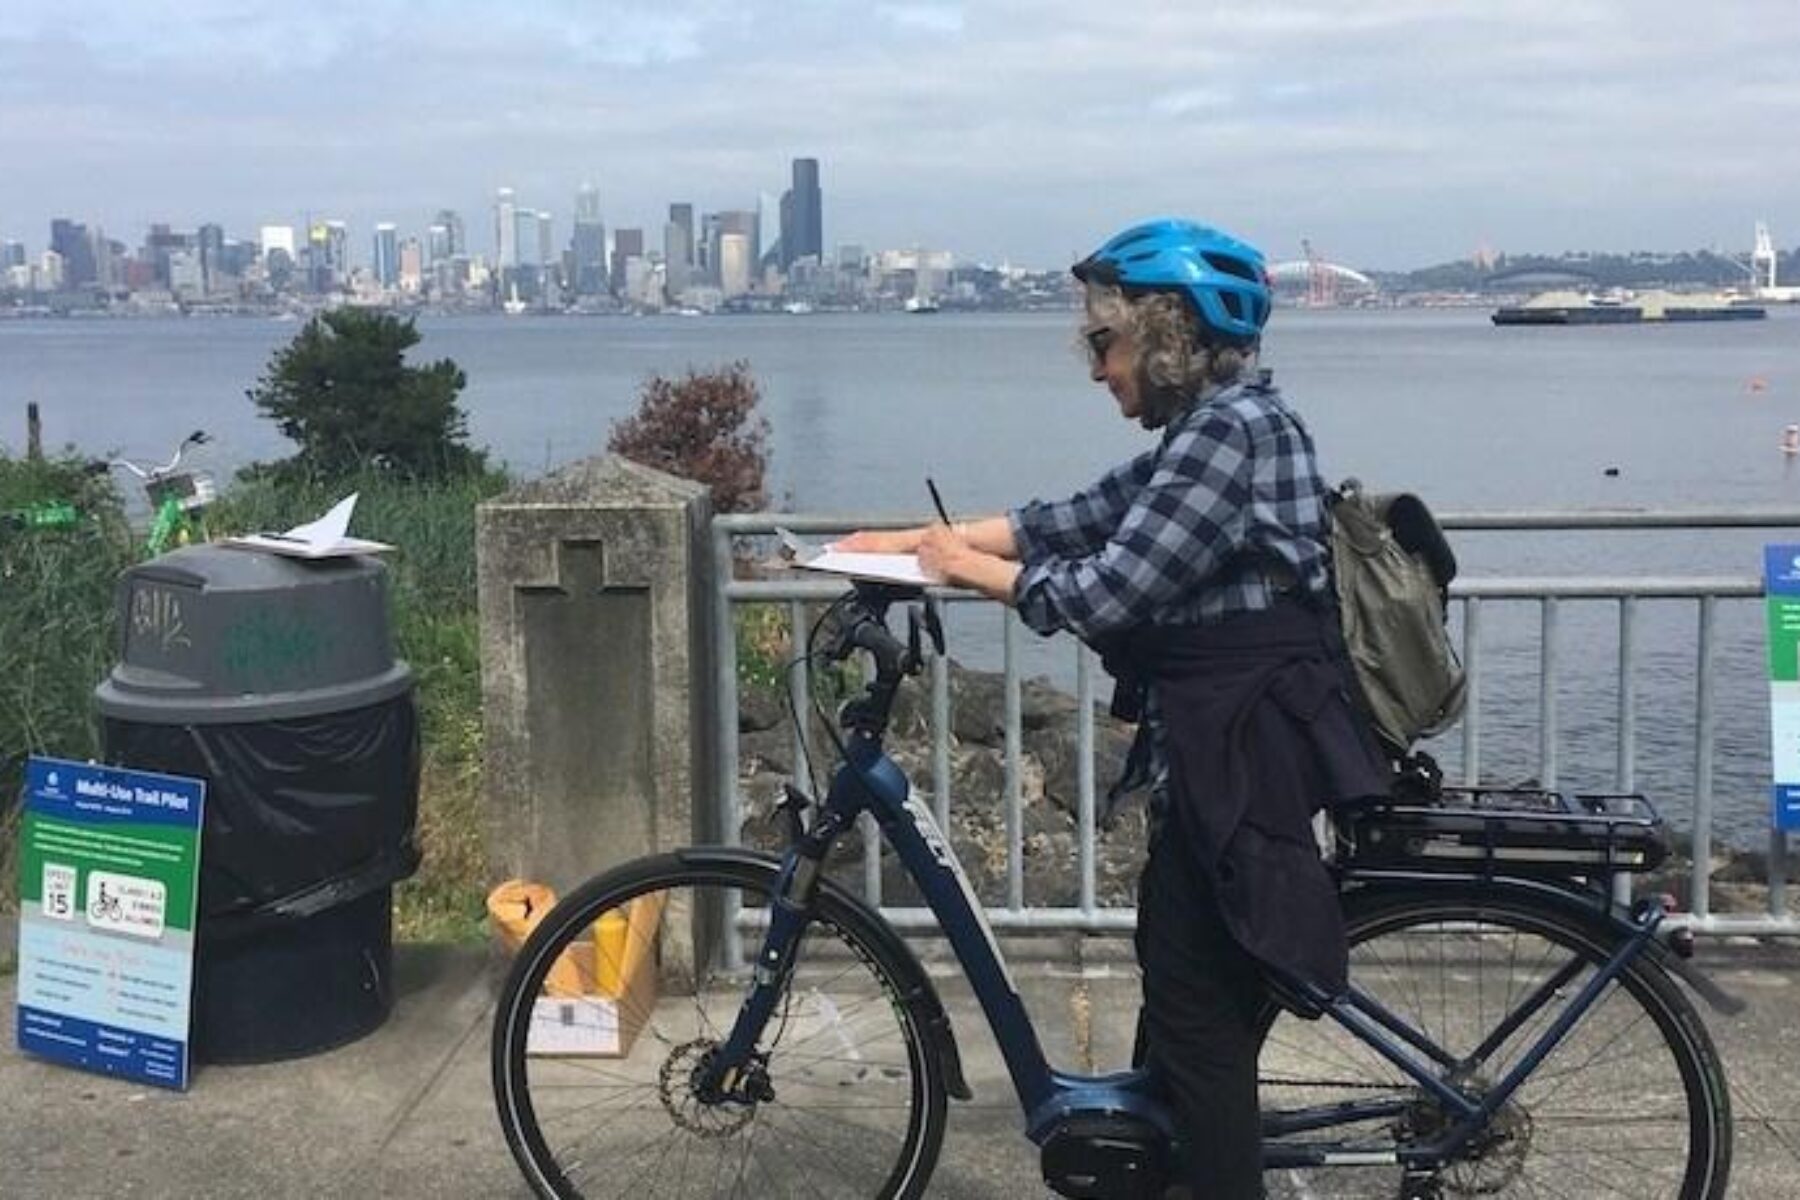 Seattle Parks and Recreation staff gathered data on nearly 10,000 trail users over the course of 25 intercept studies on five local trails for the city's e-bike pilot program. | Courtesy Seattle Parks and Recreation